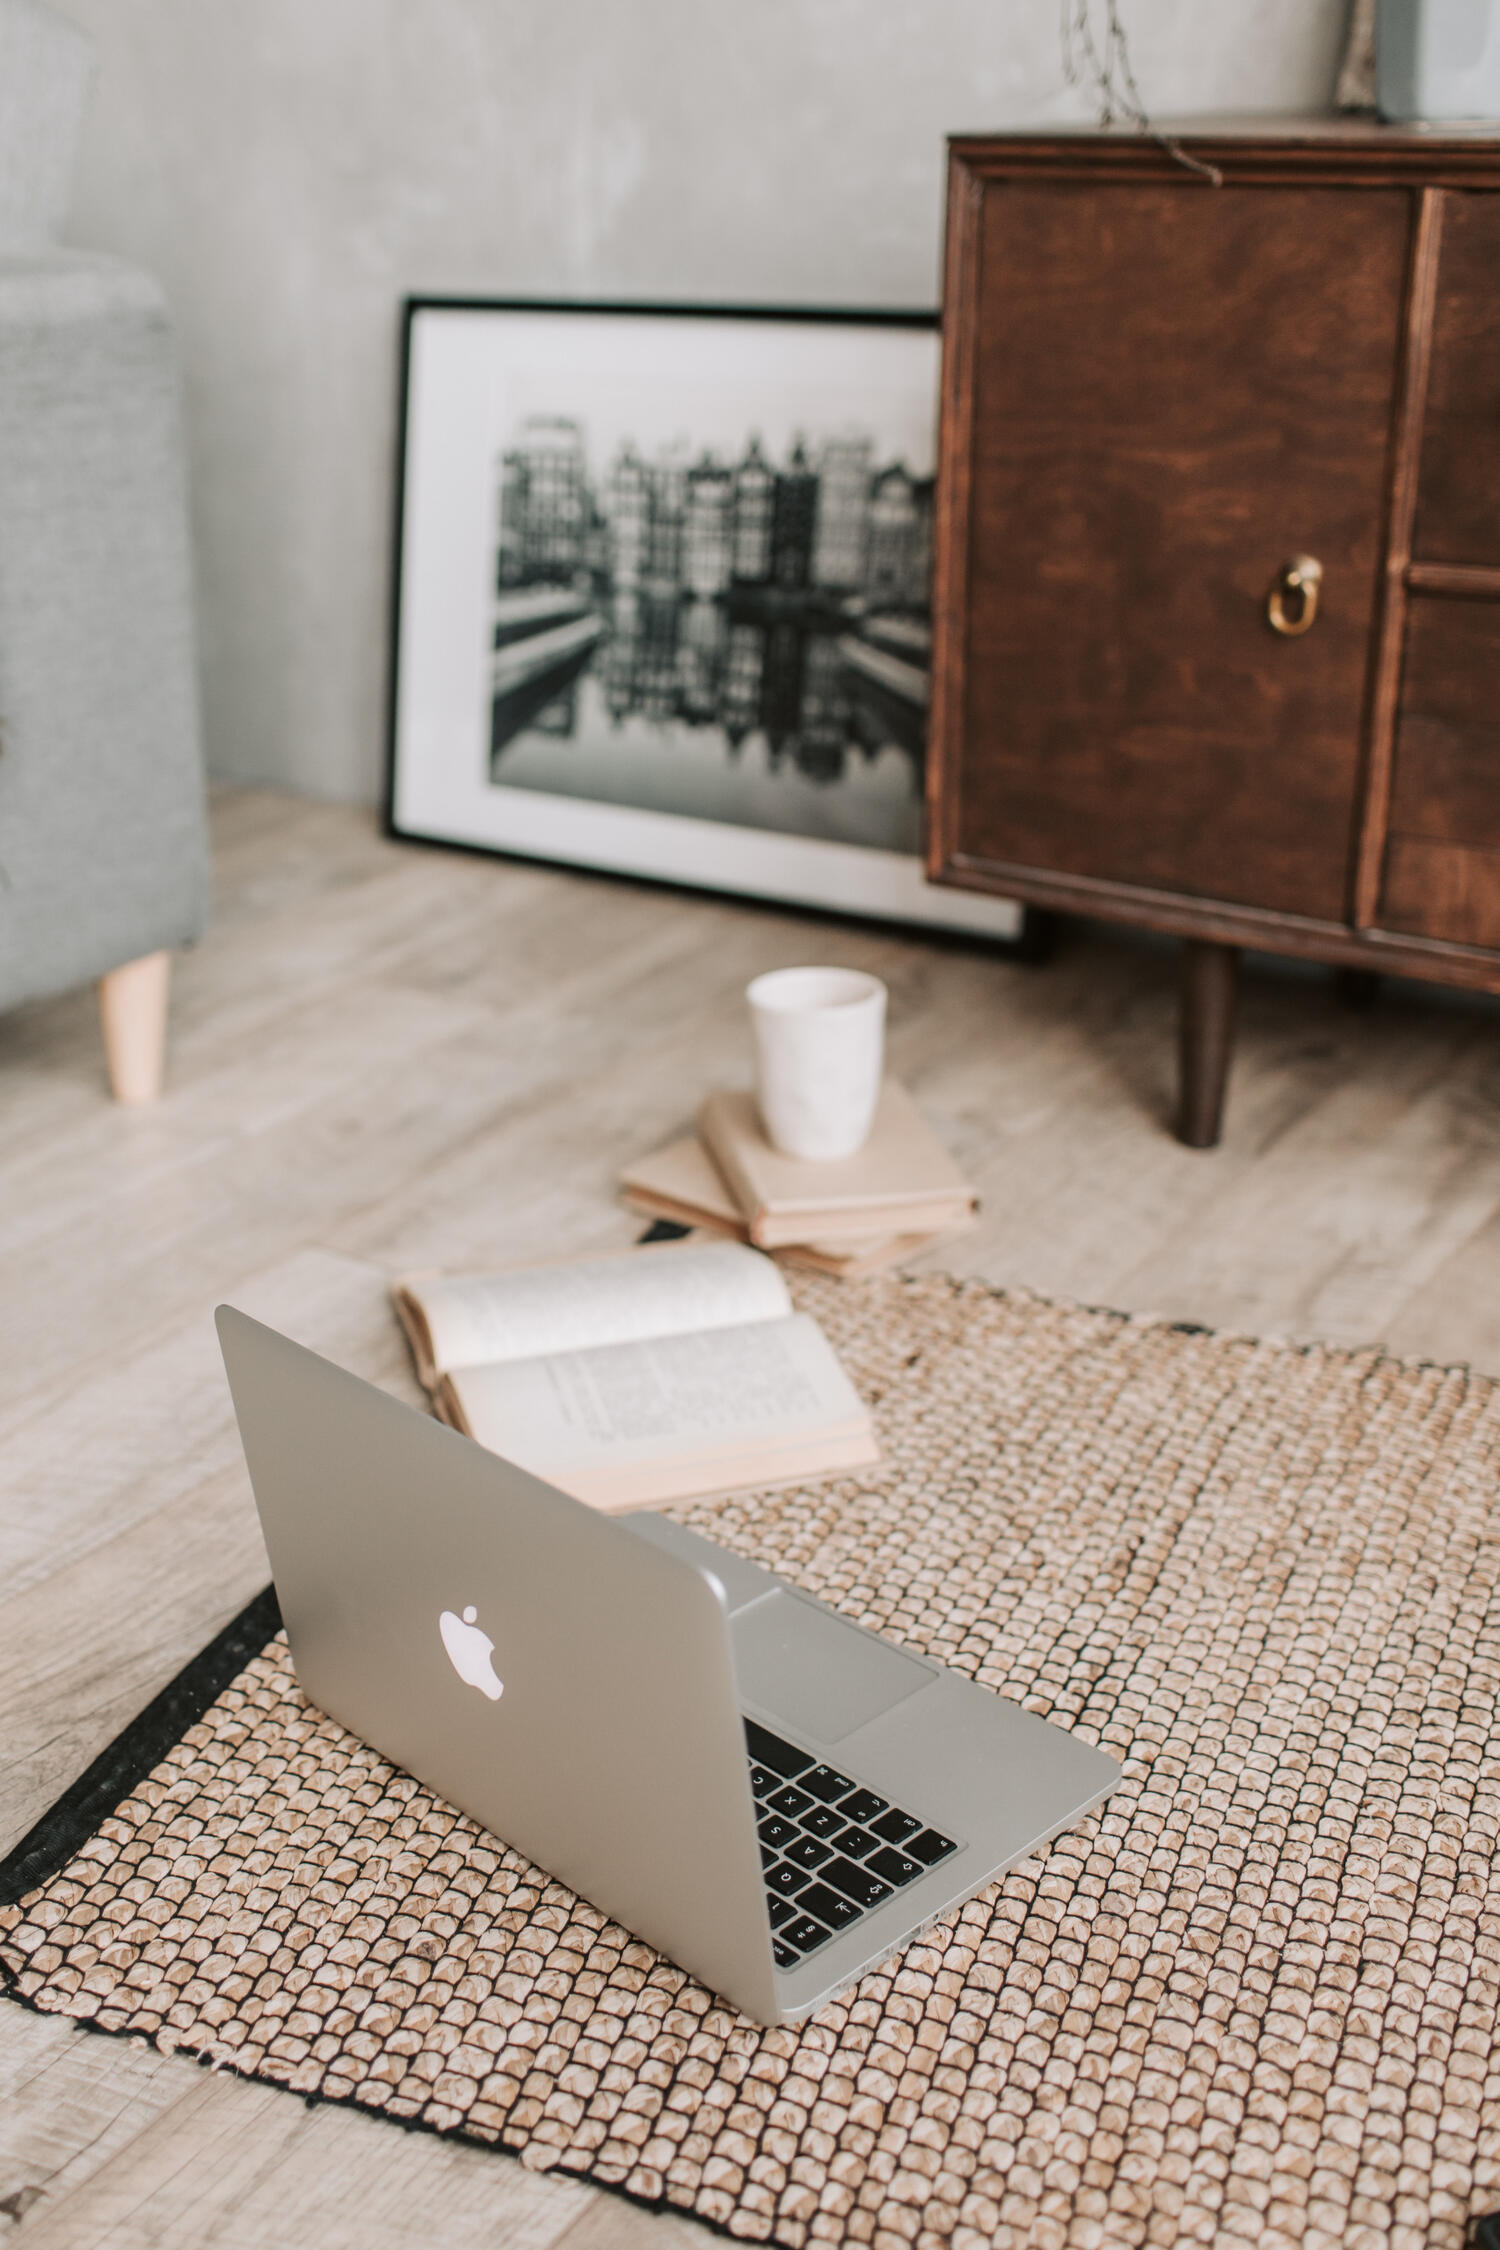 A laptop, old book, and mug on a light wood hardwood floor with a black and white print leaning against the wall between a light grey couch and dark brown antique sideboard.